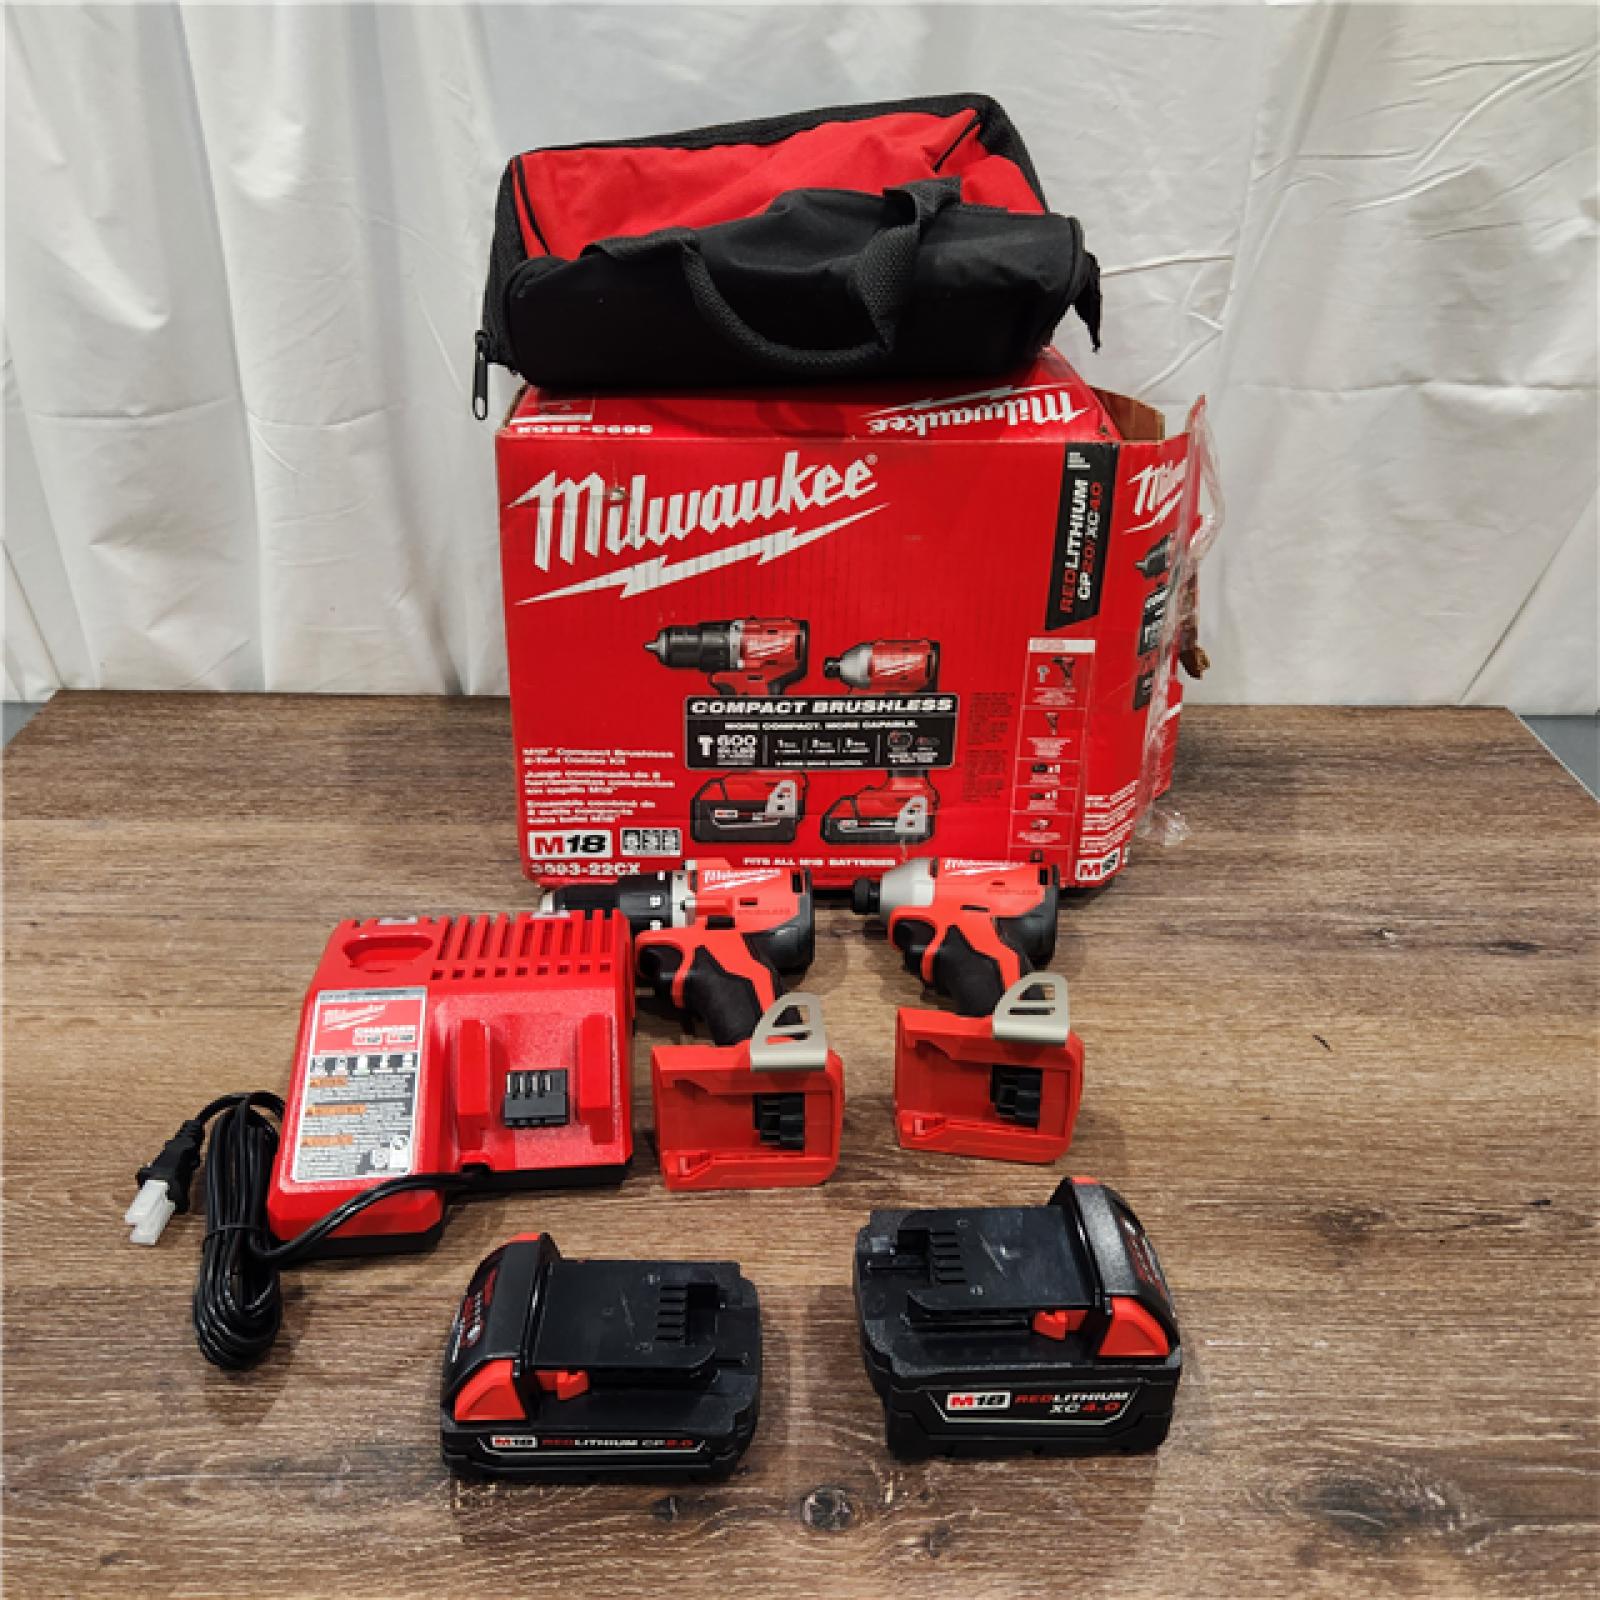 AS-IS M18 18-Volt Lithium-Ion Brushless Cordless Compact Hammer Drill/Impact Combo Kit (2-Tool) with (2) Batteries, Bag